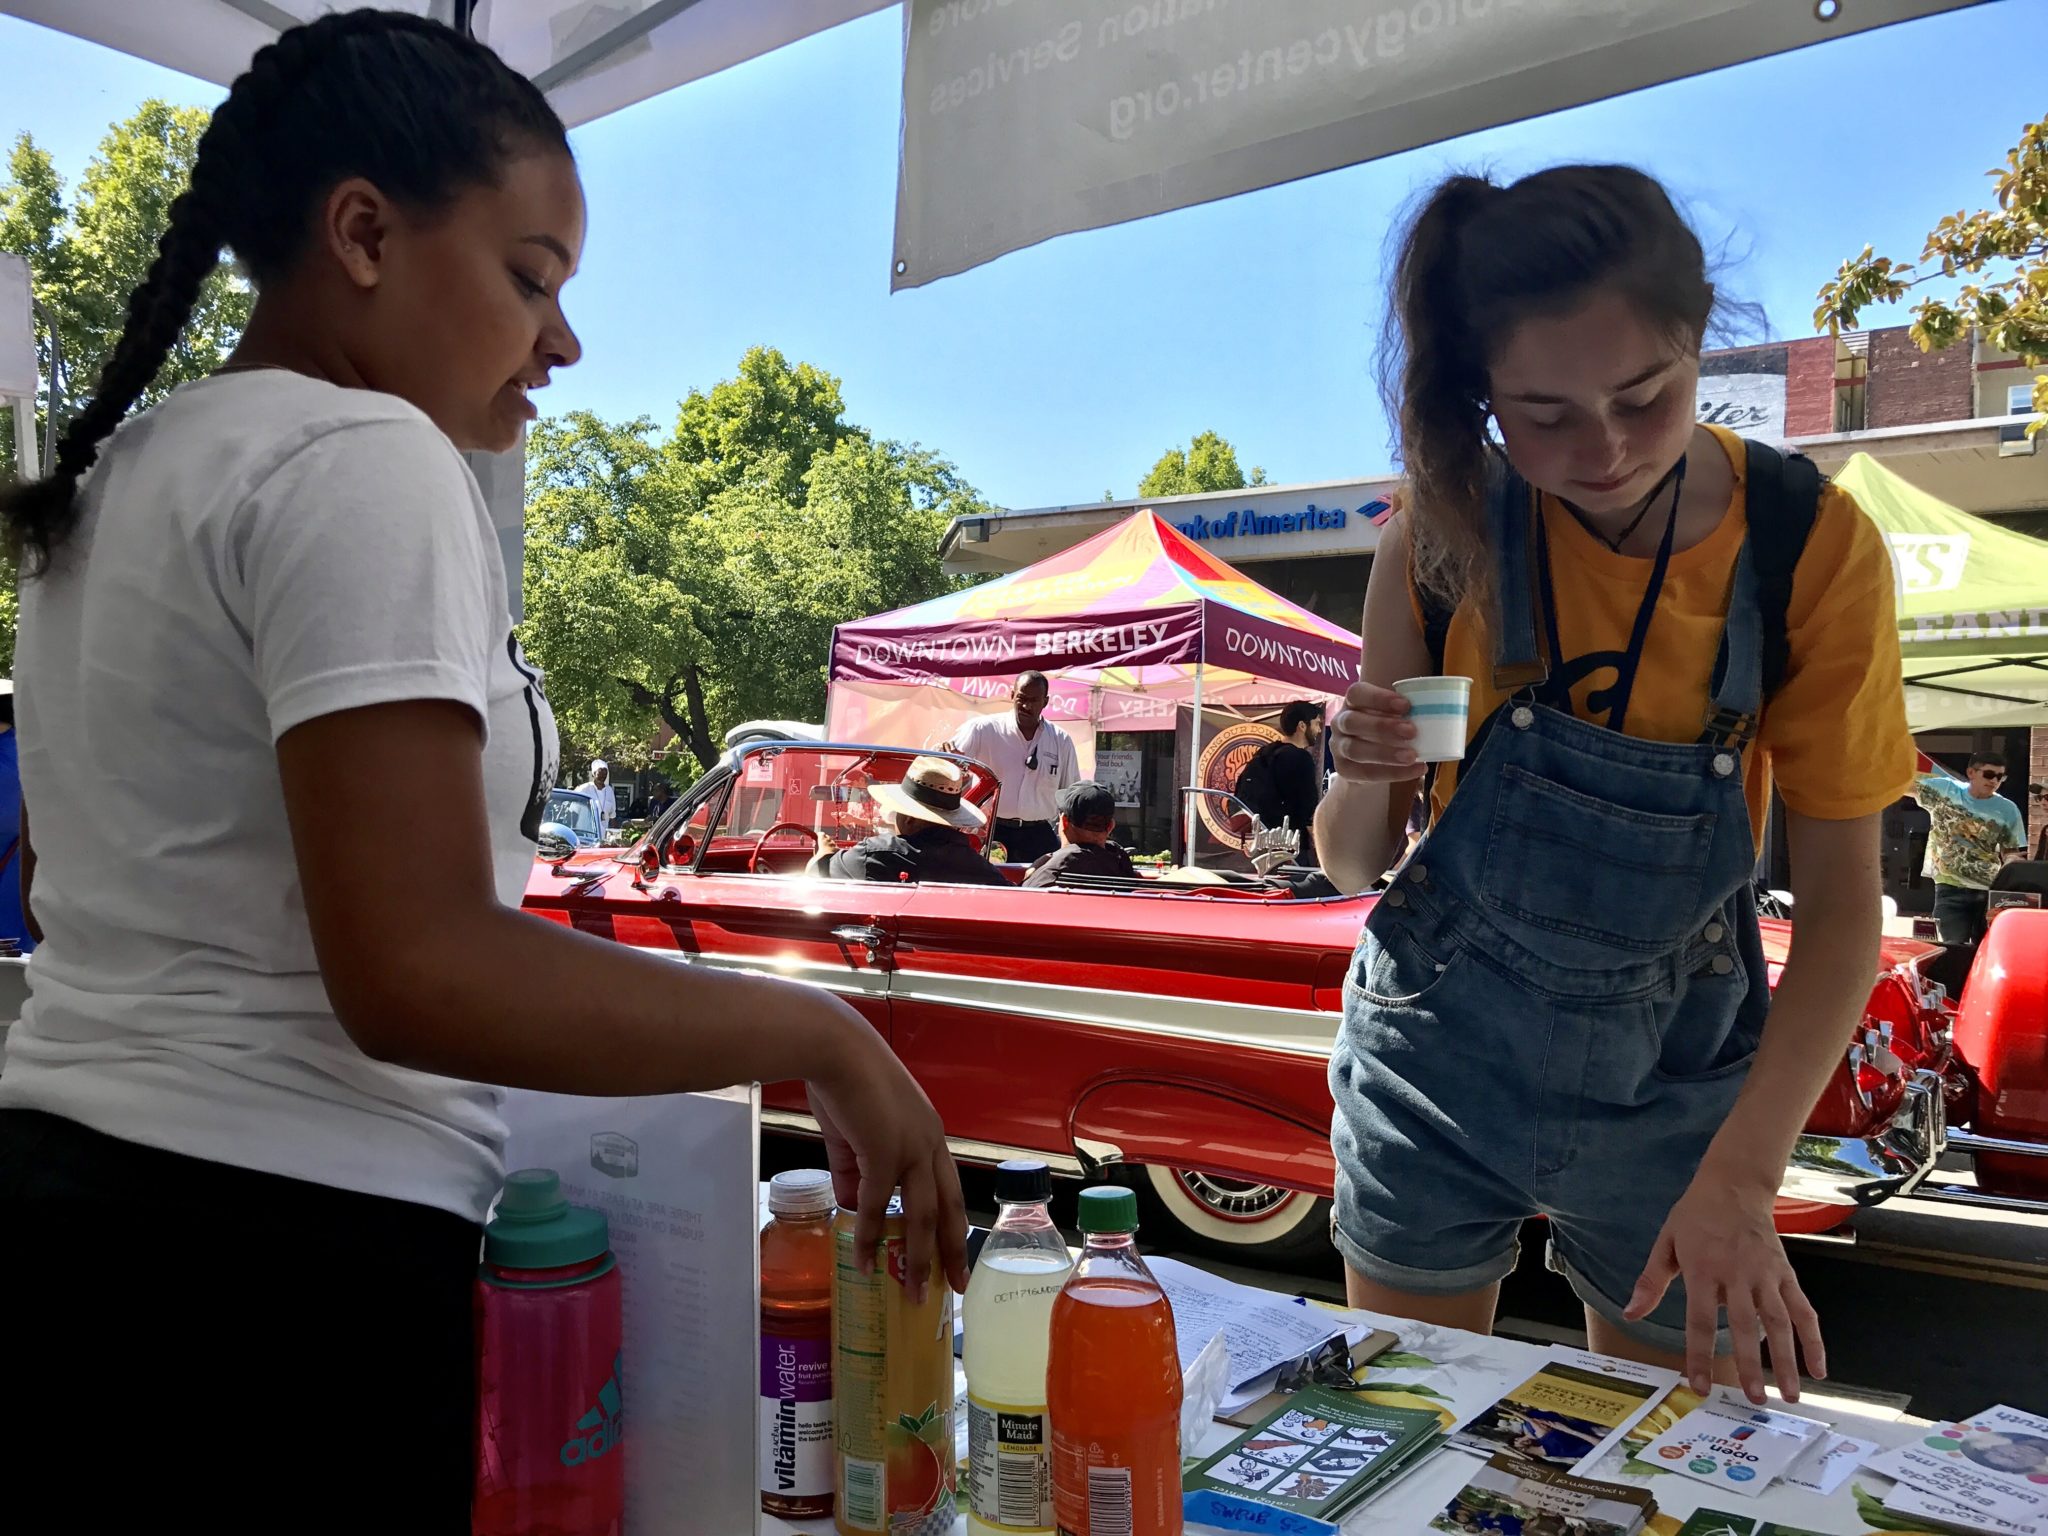 Youth Environmental Academy volunteers work at different outreach events to teach the community about the adverse health effects of sugar-sweetened beverages and share healthier food options. Photo by the Ecology Center.